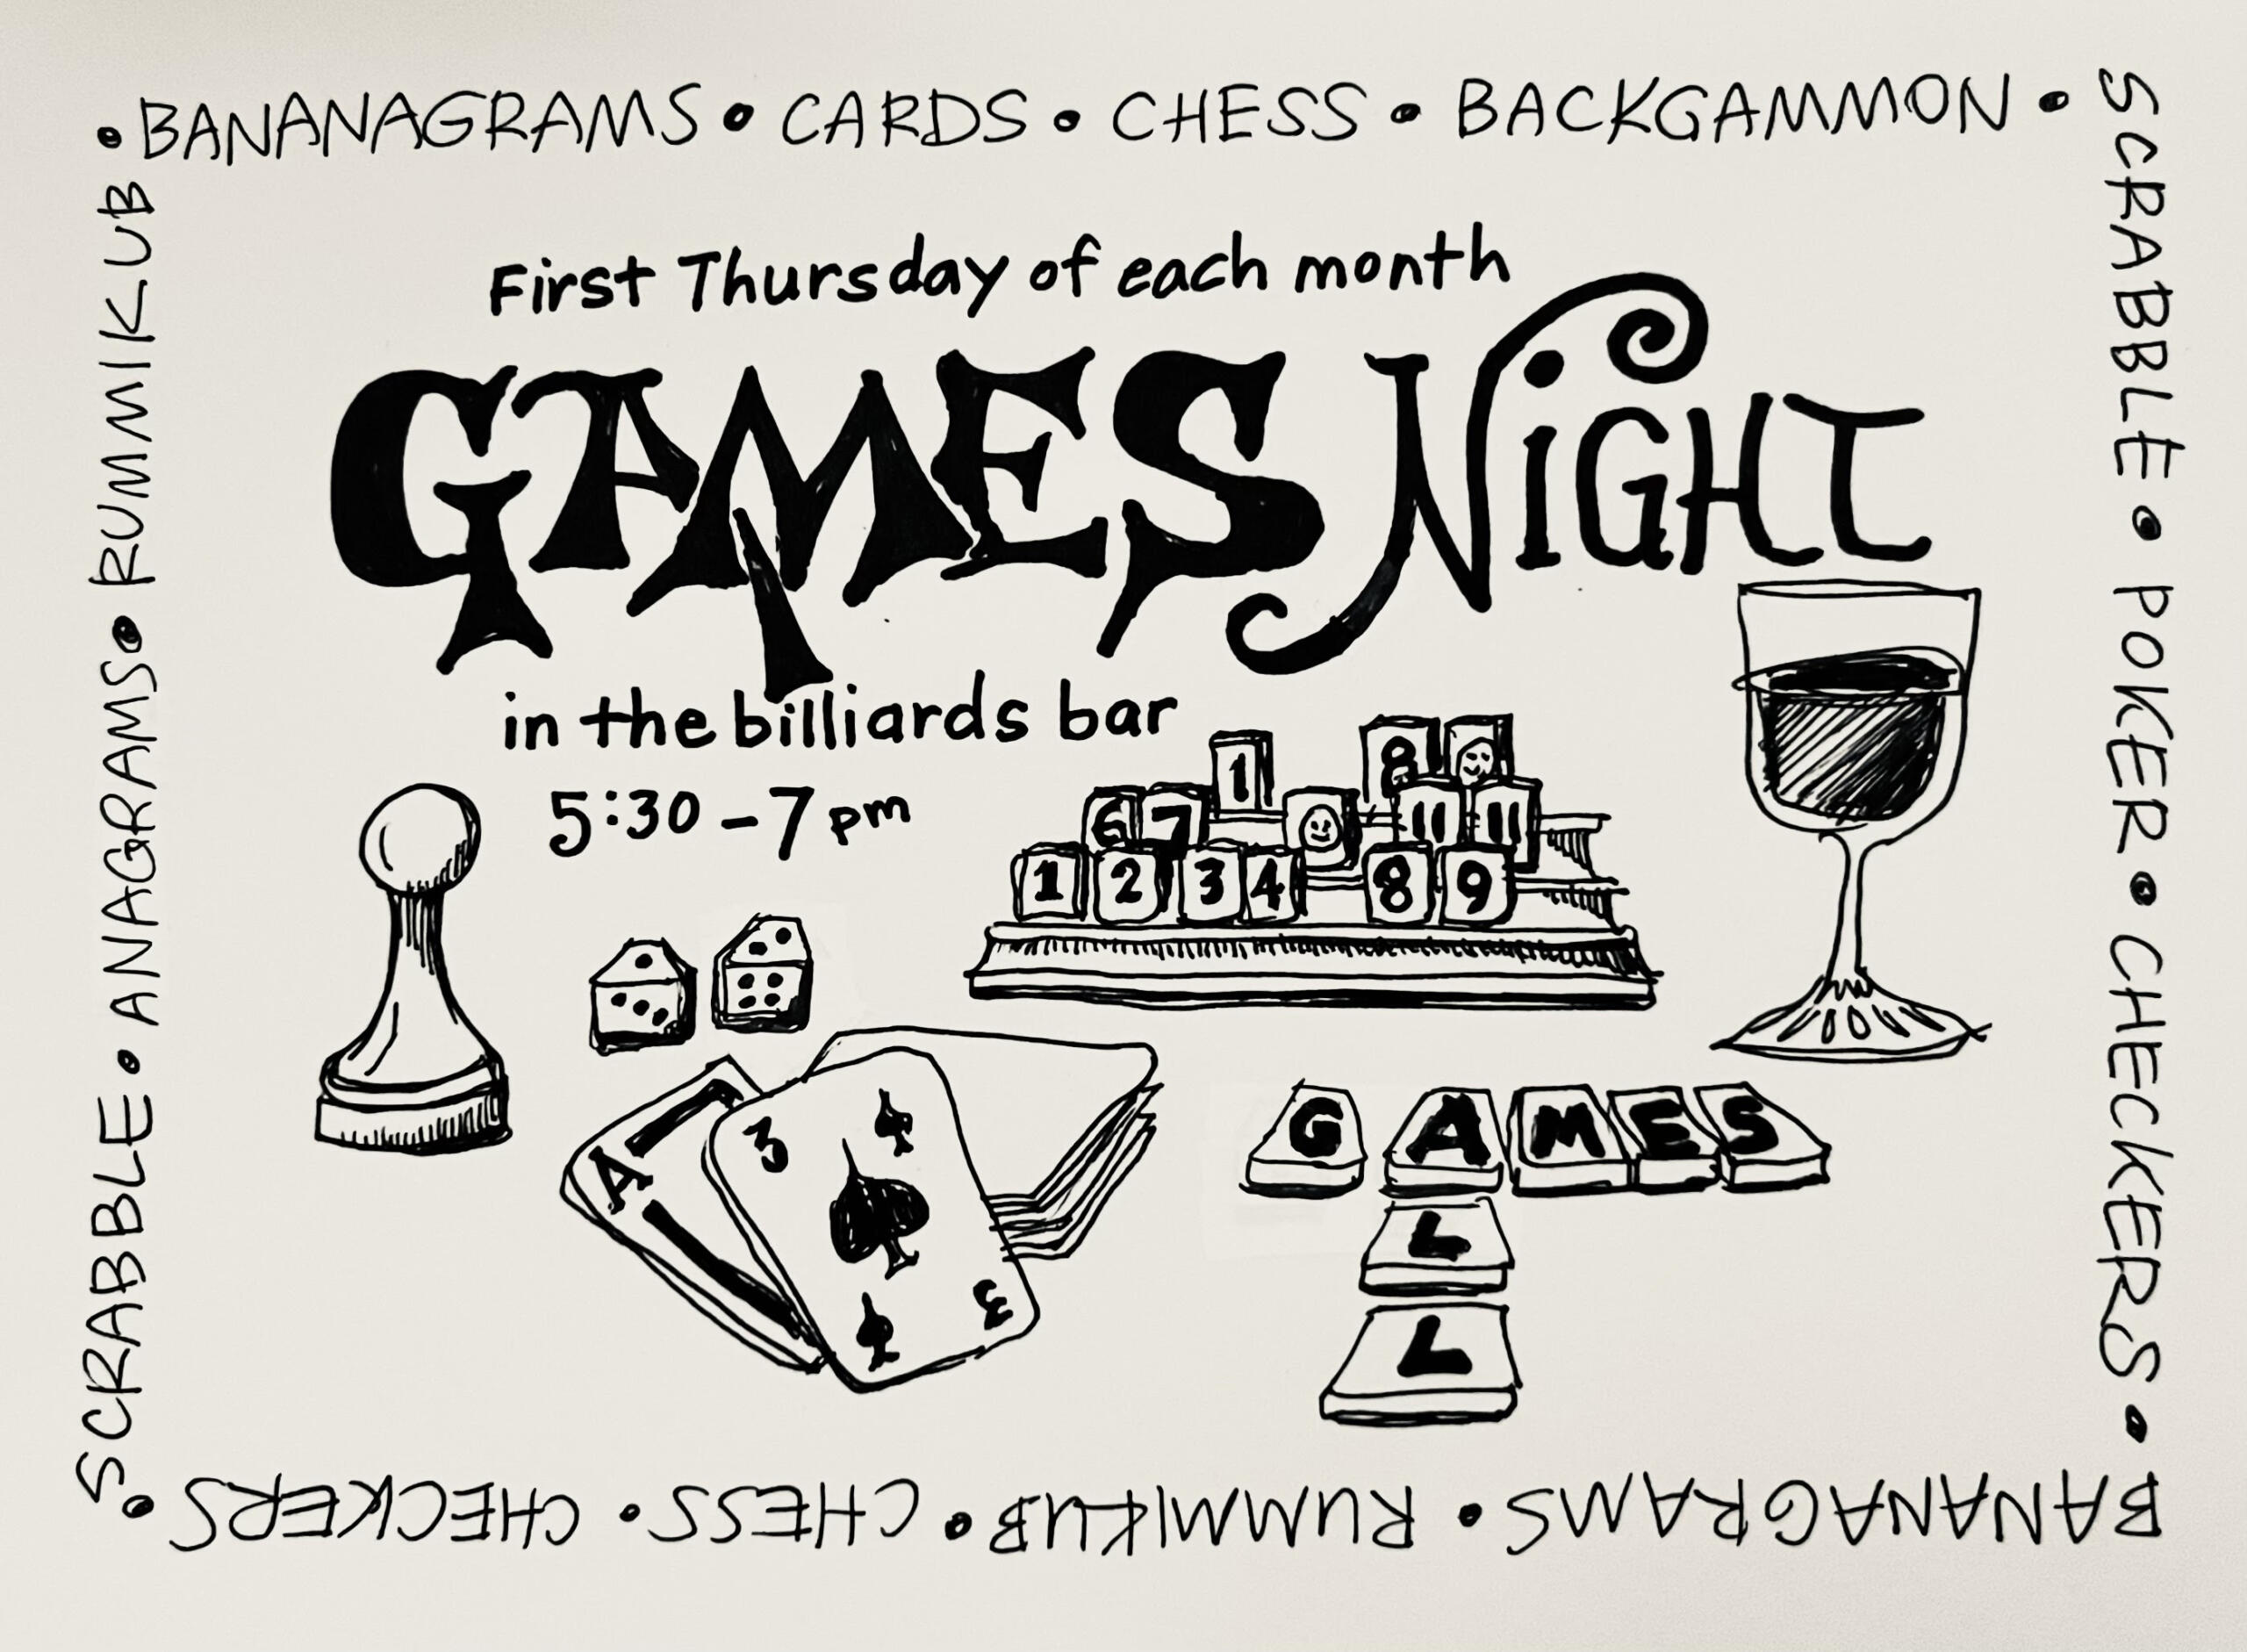 A line drawing of various tabletop games such as chess, cards, and scrabble with a glass of wine. GAMES is hand-lettered in a bold type while NIGHT is written elegantly with a curling N.